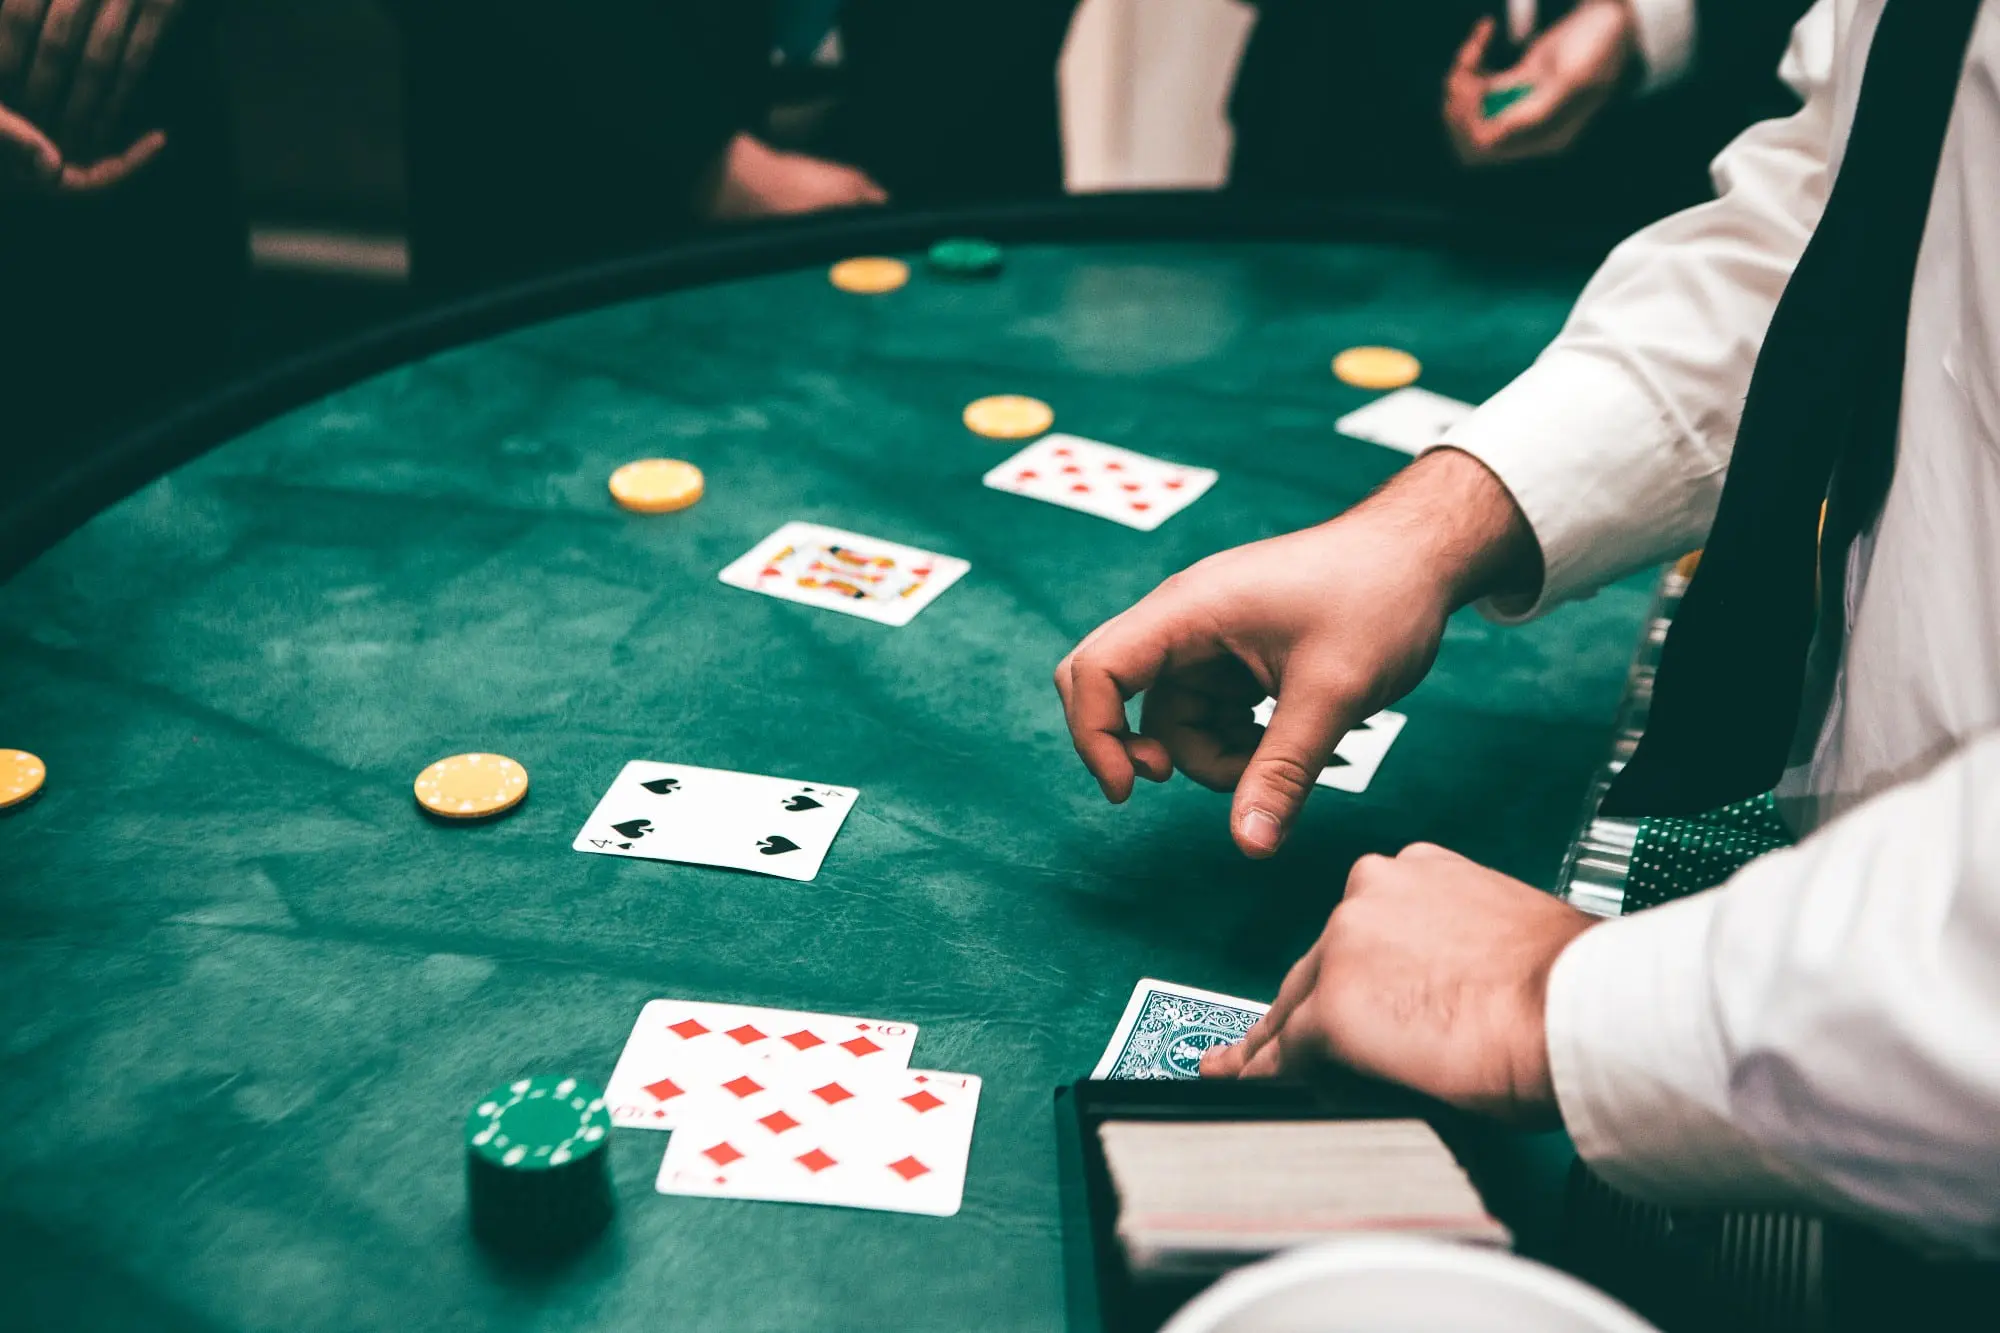 How To Develop a Healthy Relationship With Gambling